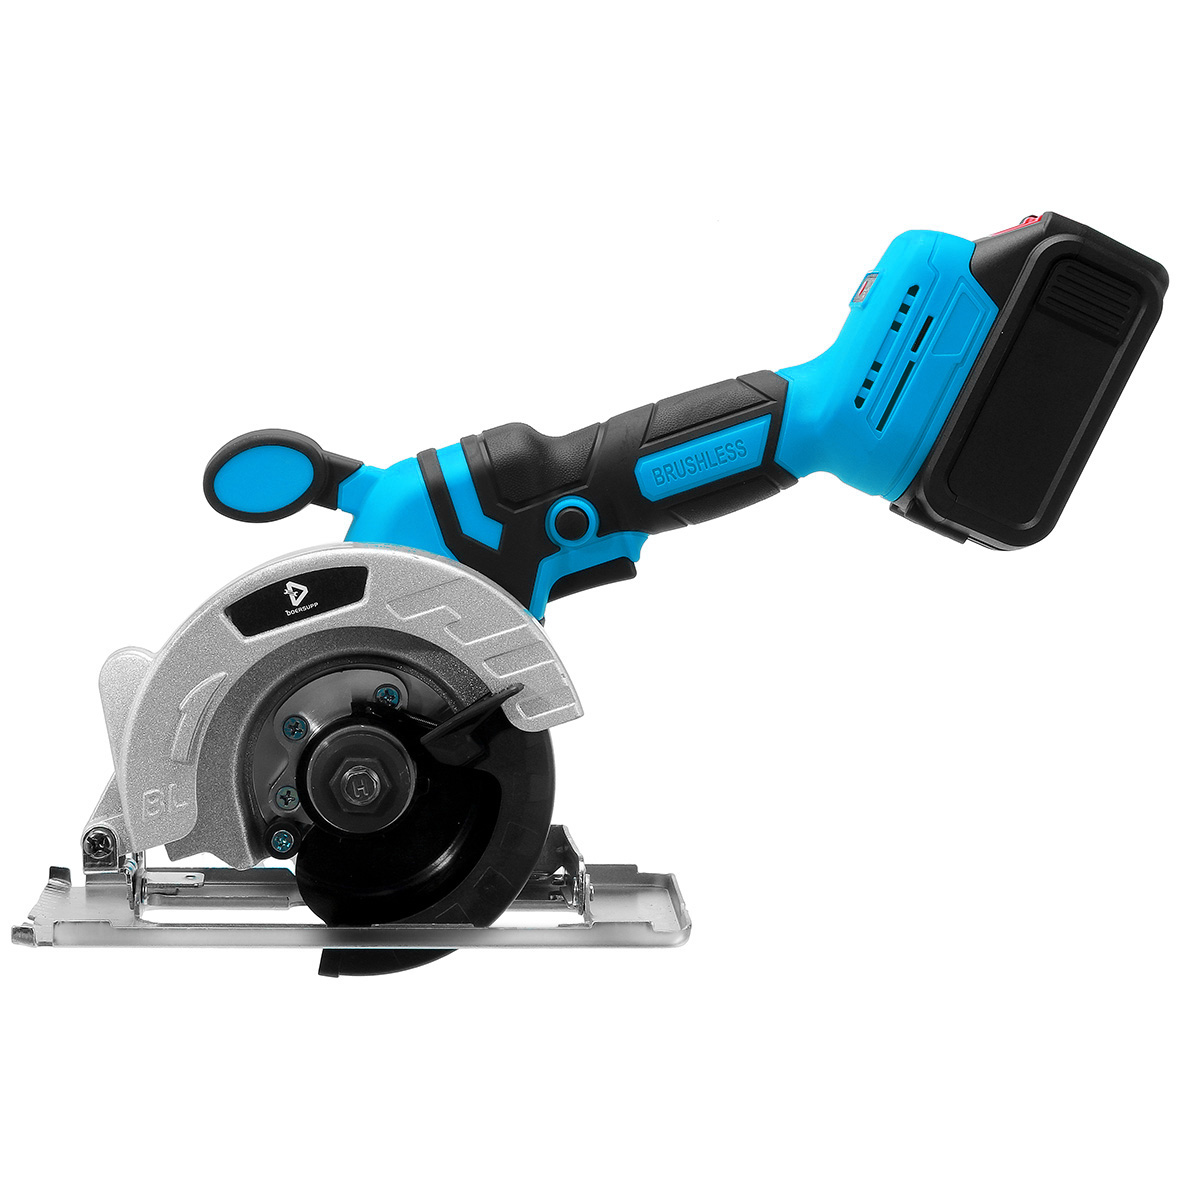 20V-125MM-Electric-Cordless-Brushless-Circular-Saw-Auxiliary-Handle-Household-Woodworking-Tools-DIY--1907960-11